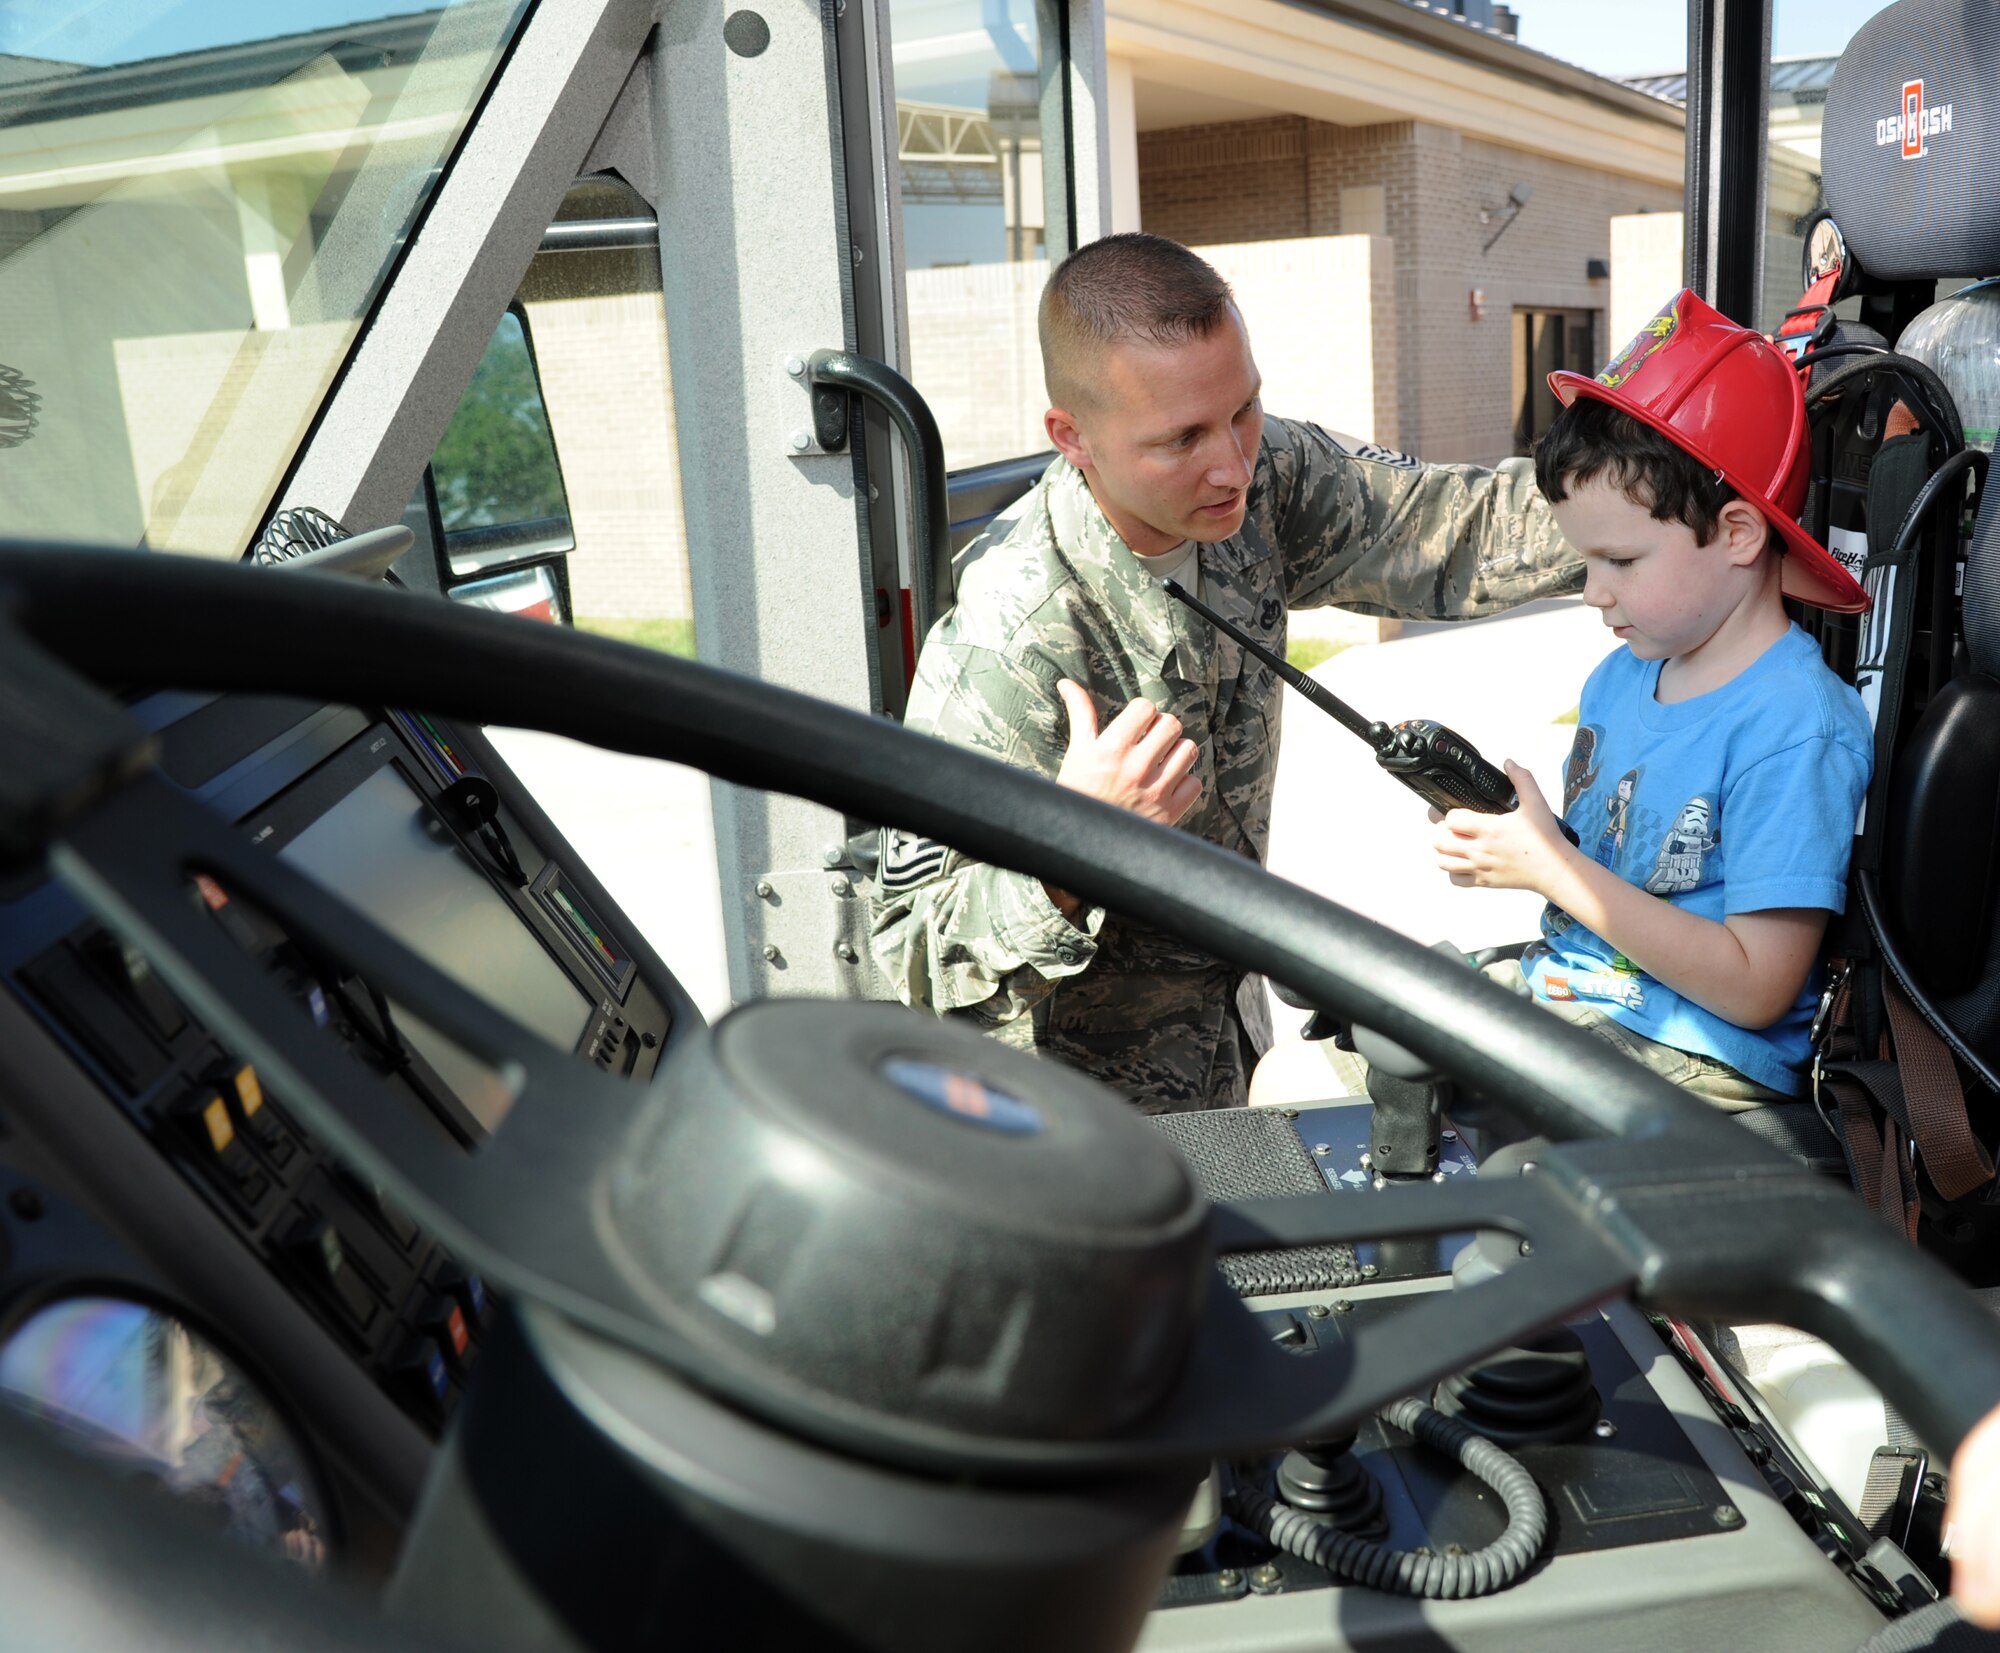 Daniyel Blankenship, Keesler firefighter, provides a tour of a fire truck to Keaton Tottle, 5, son of April and Tech. Sgt. Ken Tottle, 335th Training Squadron, during the Keesler Fire Department’s open house Oct. 13, 2012, Keesler Air Force Base, Miss.  The event was held on the final day of fire prevention week during which the fire department conducted random fire drills throughout the base, toured various facilities with Sparky the Fire Dog, passed out fire safety handouts and fire hats for children and provided stove and fire extinguisher demonstrations.  A.J.’s mother, Lt. Col. Carolyn Pignataro, 81st Medical Group, is currently deployed to Afghanistan.  (U.S. Air Force photo by Kemberly Groue)